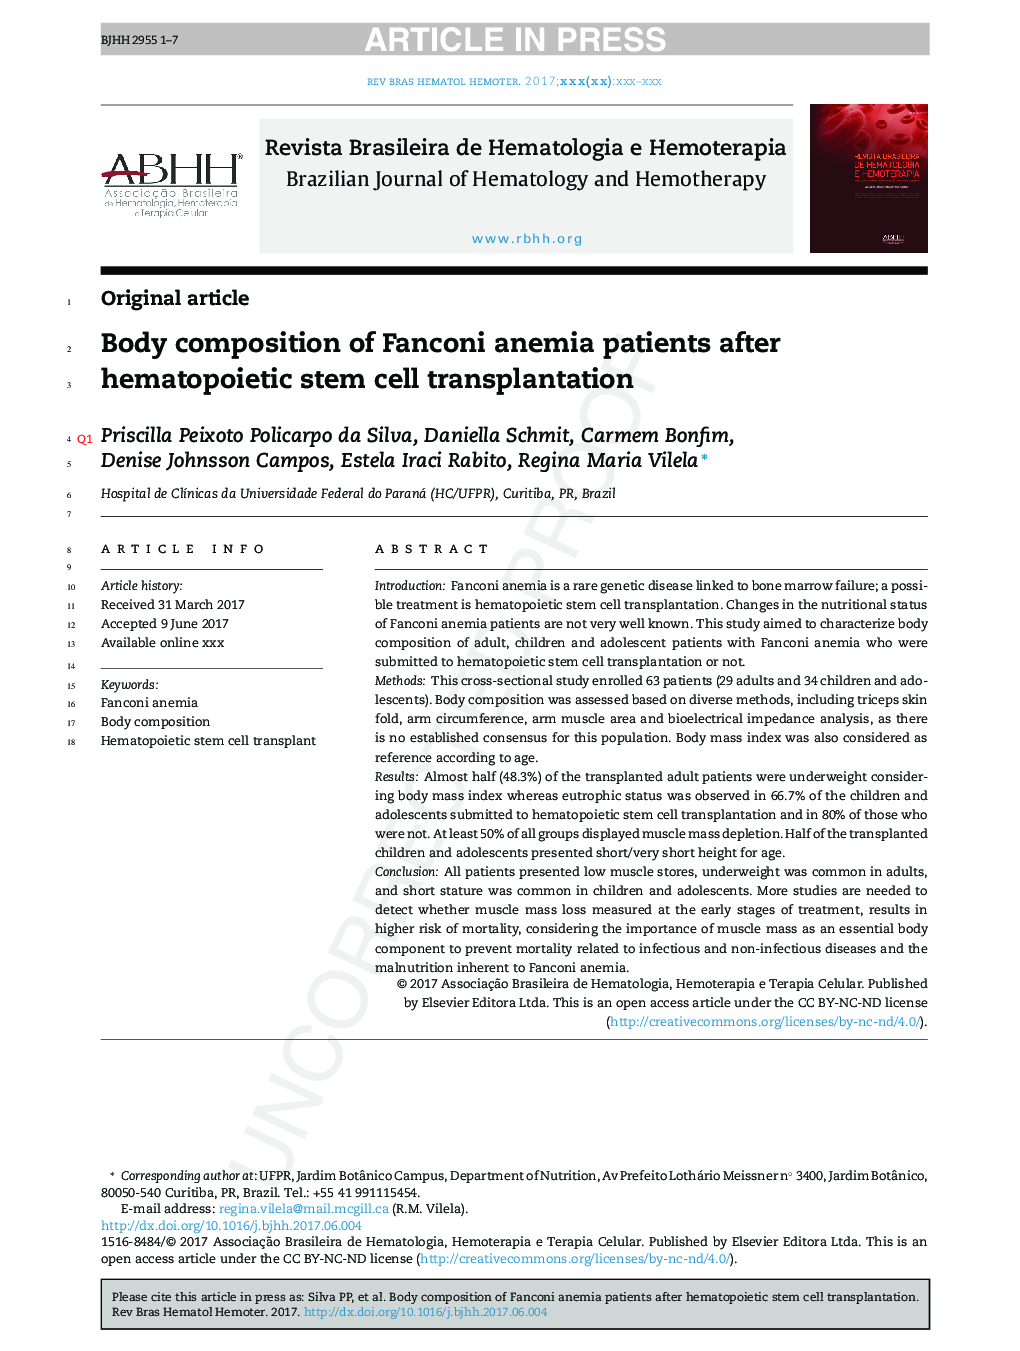 Body composition of Fanconi anemia patients after hematopoietic stem cell transplantation